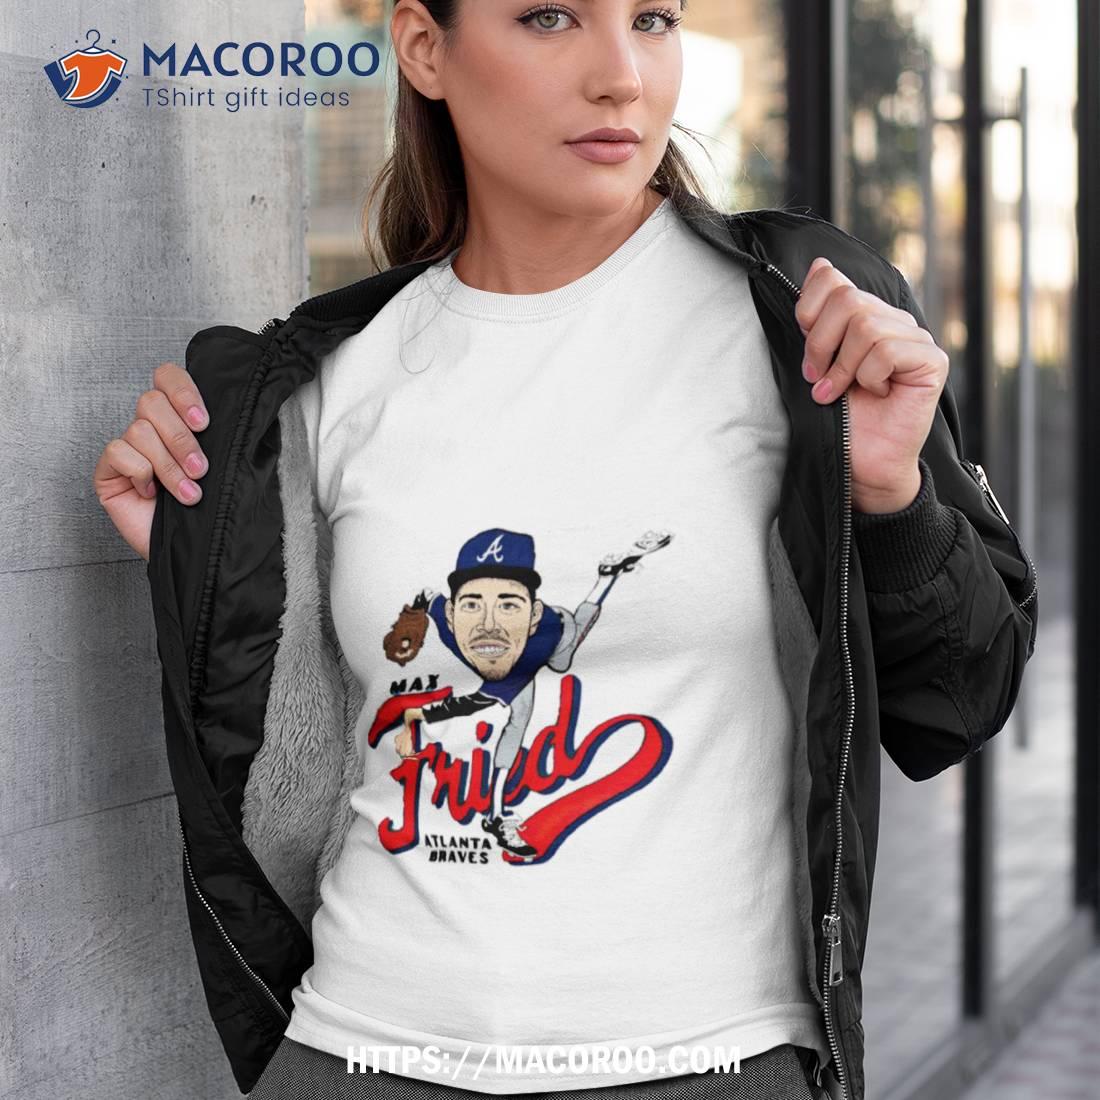 braves tee shirts for sale